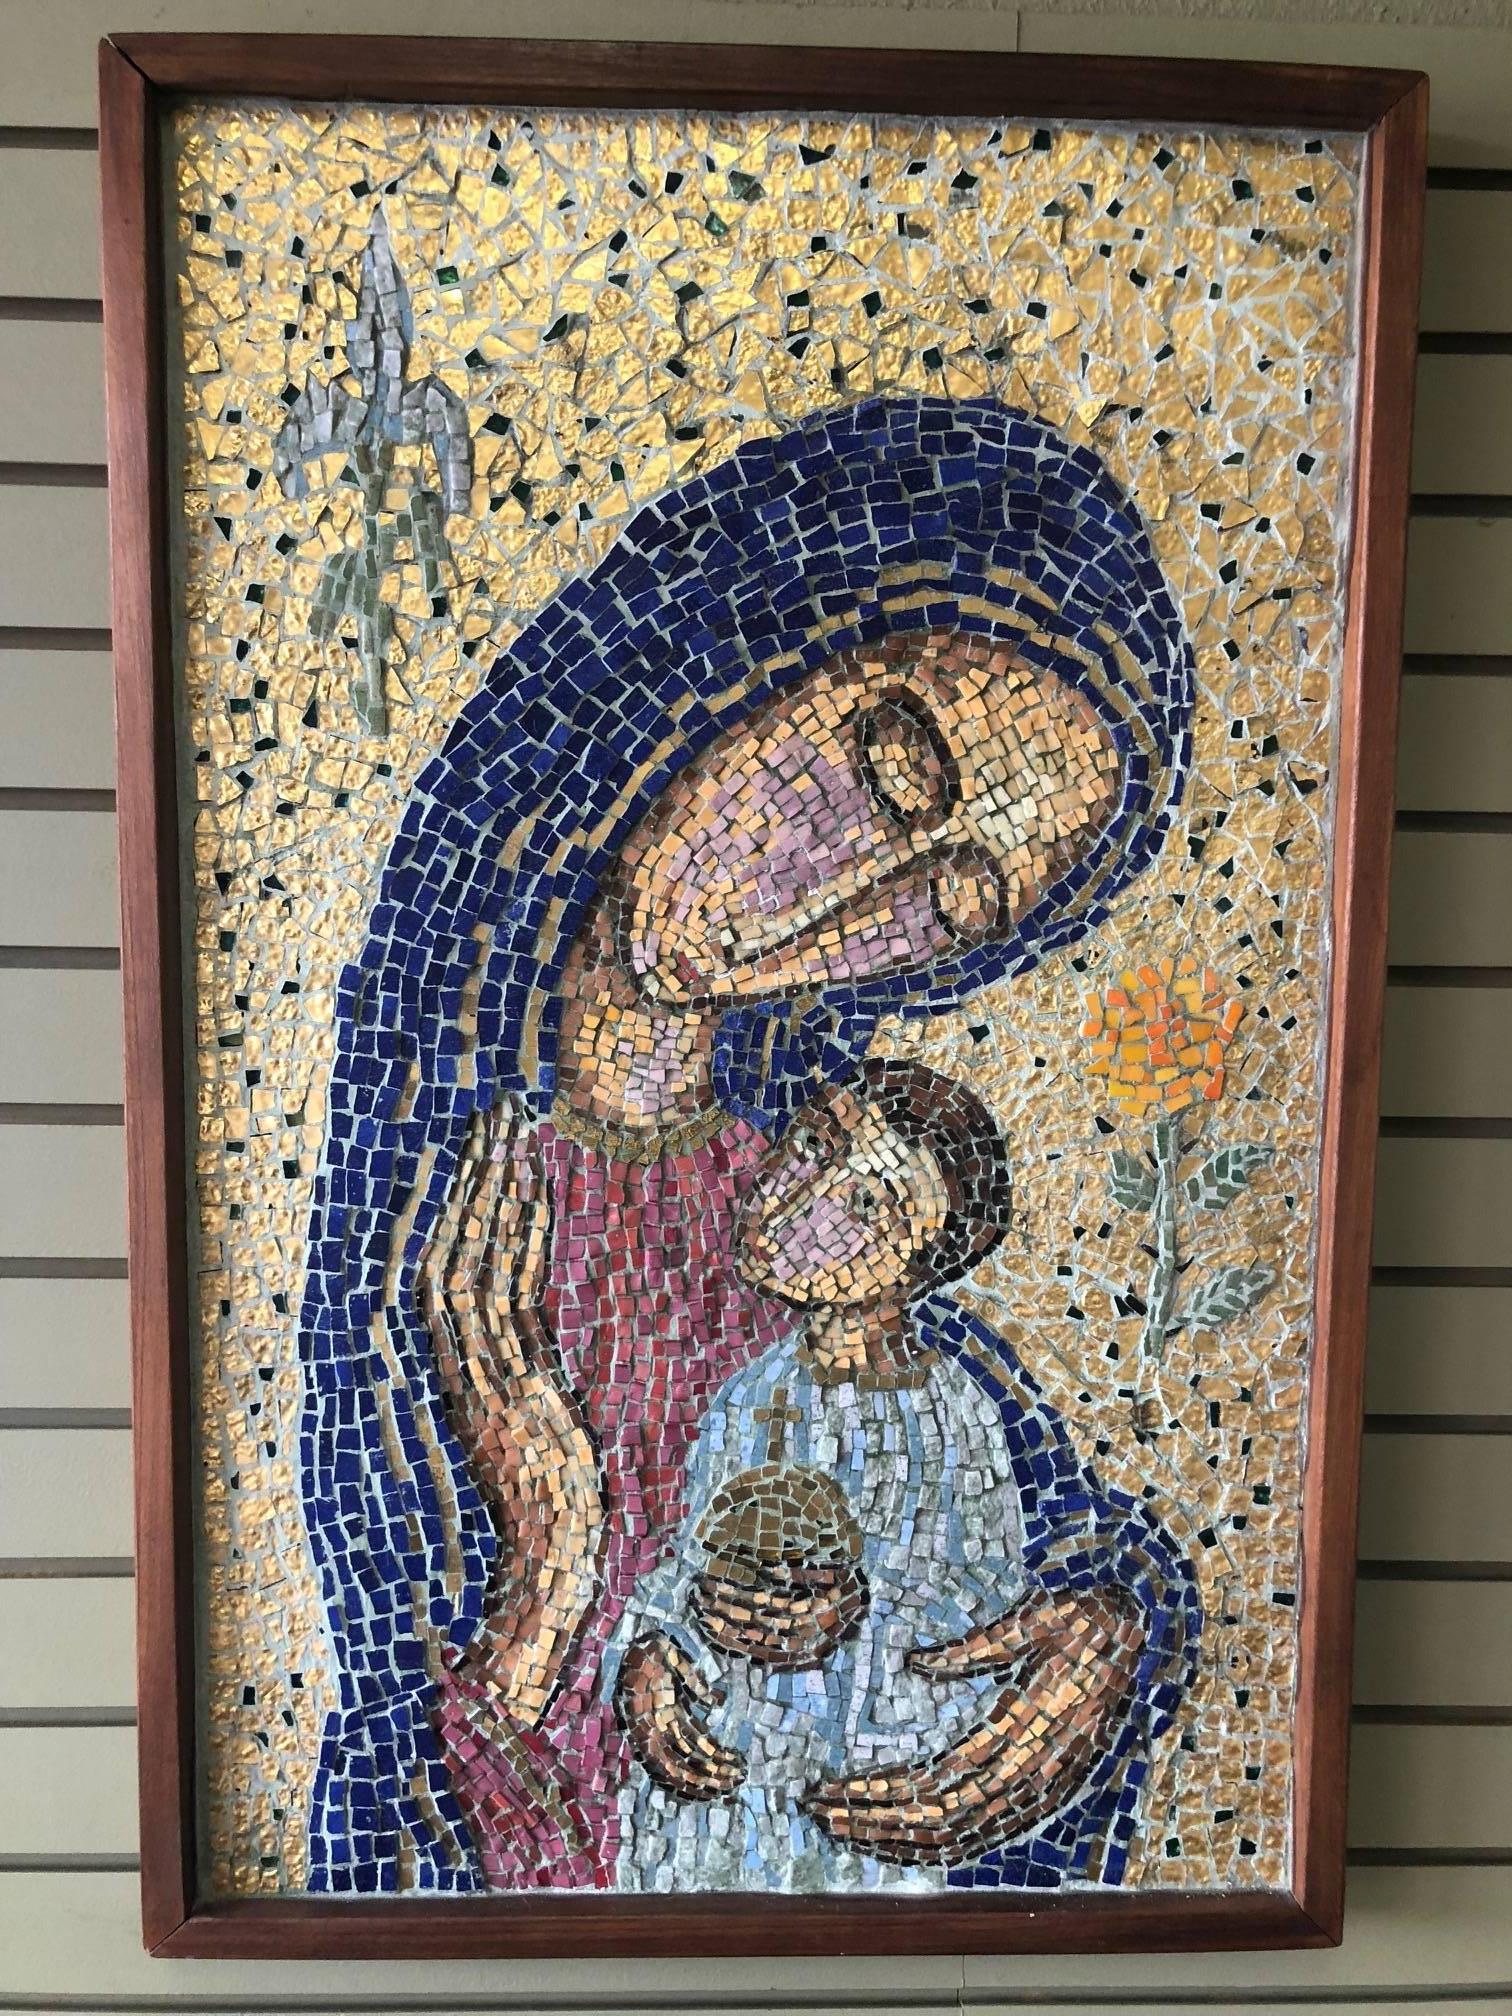 Midcentury mosiac of mother and child by Carmel, CA artist Geza St Galy, circa 1960s. The subject is a modernist representation of baby Jesus and Mary. The piece is framed in deep redwood and is unsigned.

Geza St Galy was born in Hungary in 1902,